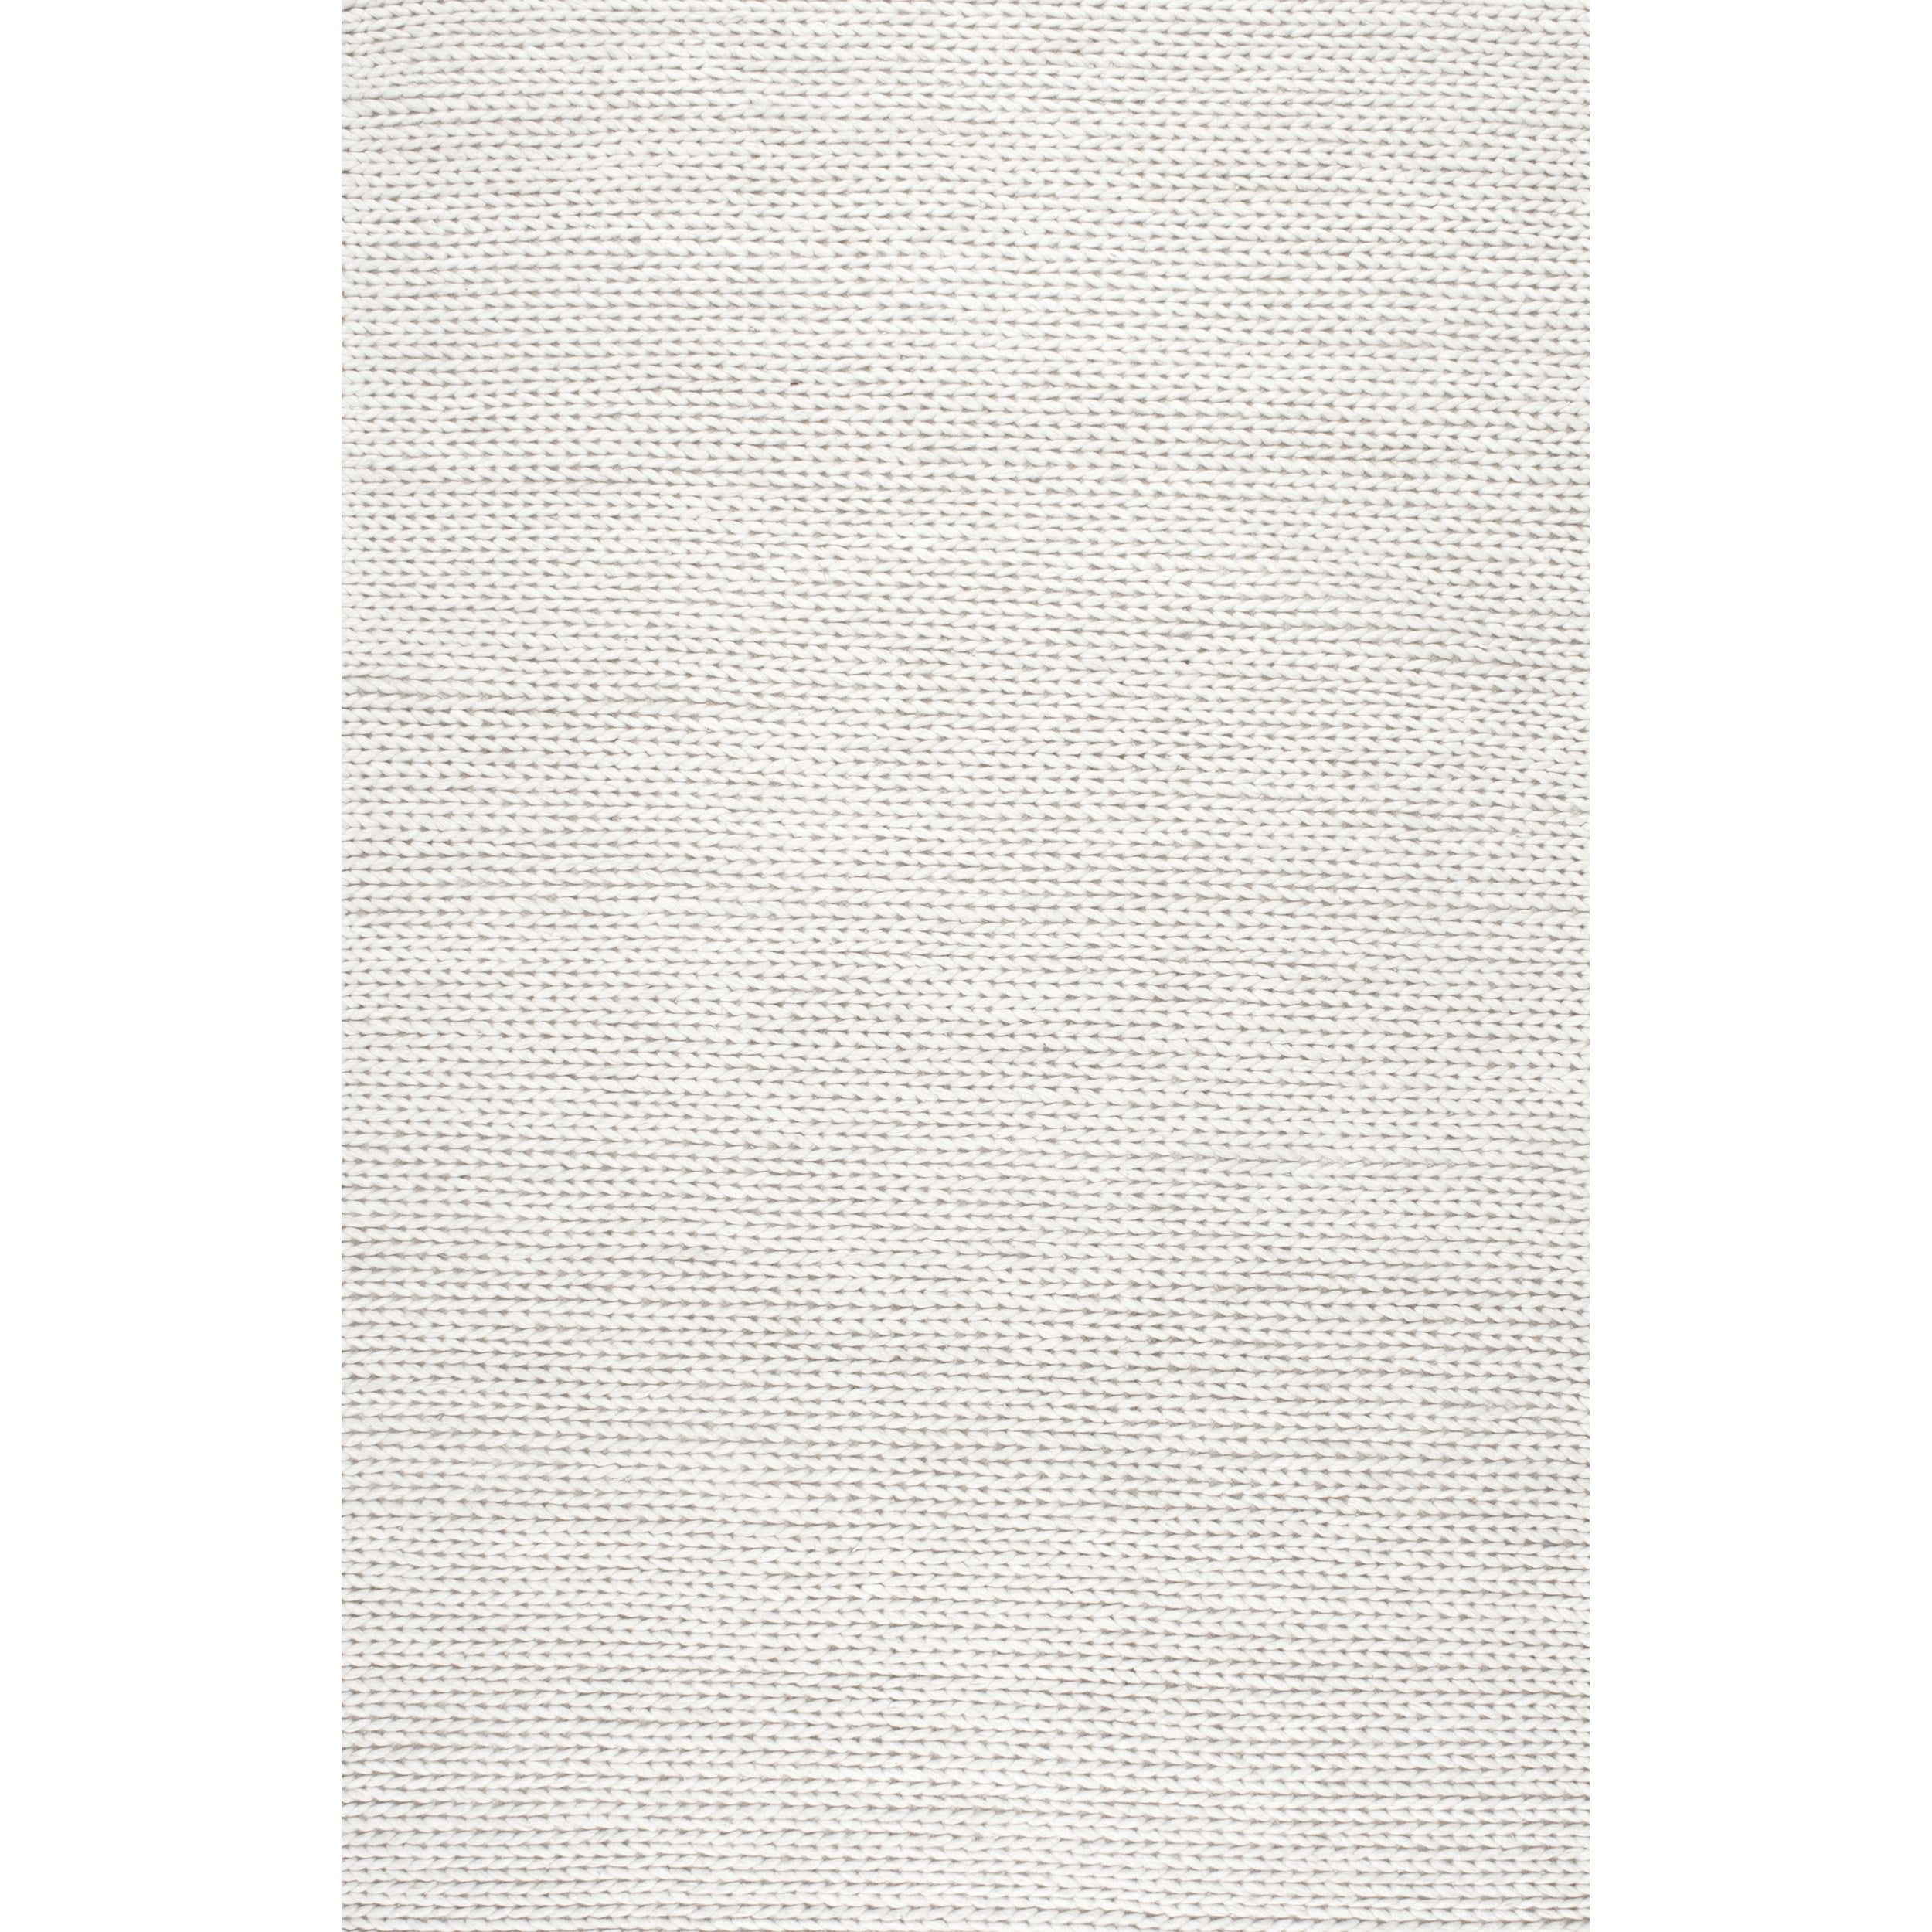 Luxurious Off-White Braided Wool 6' Square Area Rug